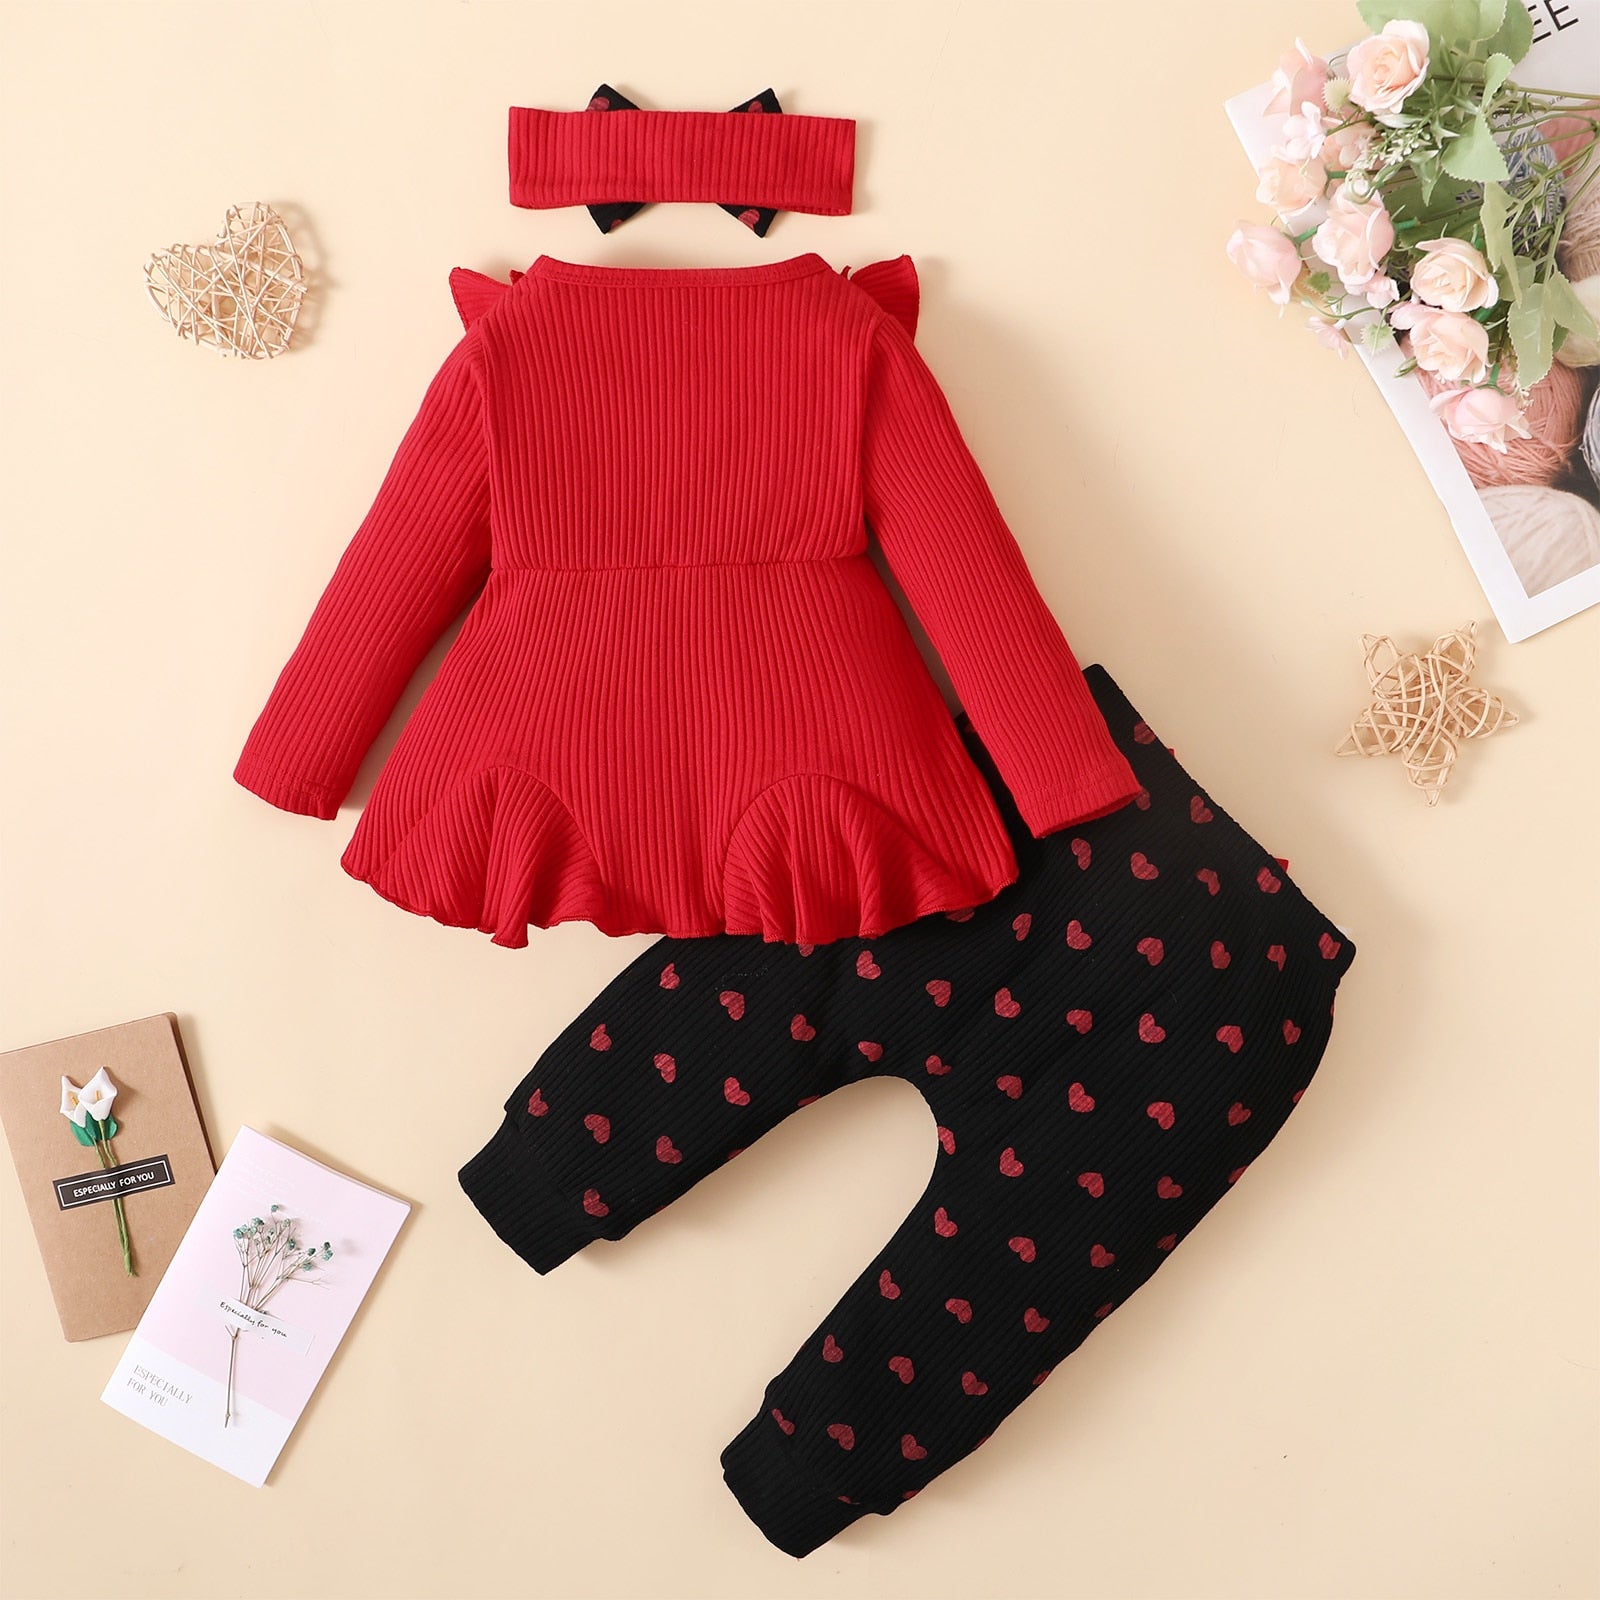 3-Piece Bowknot Girl Outfit in Red from the back.